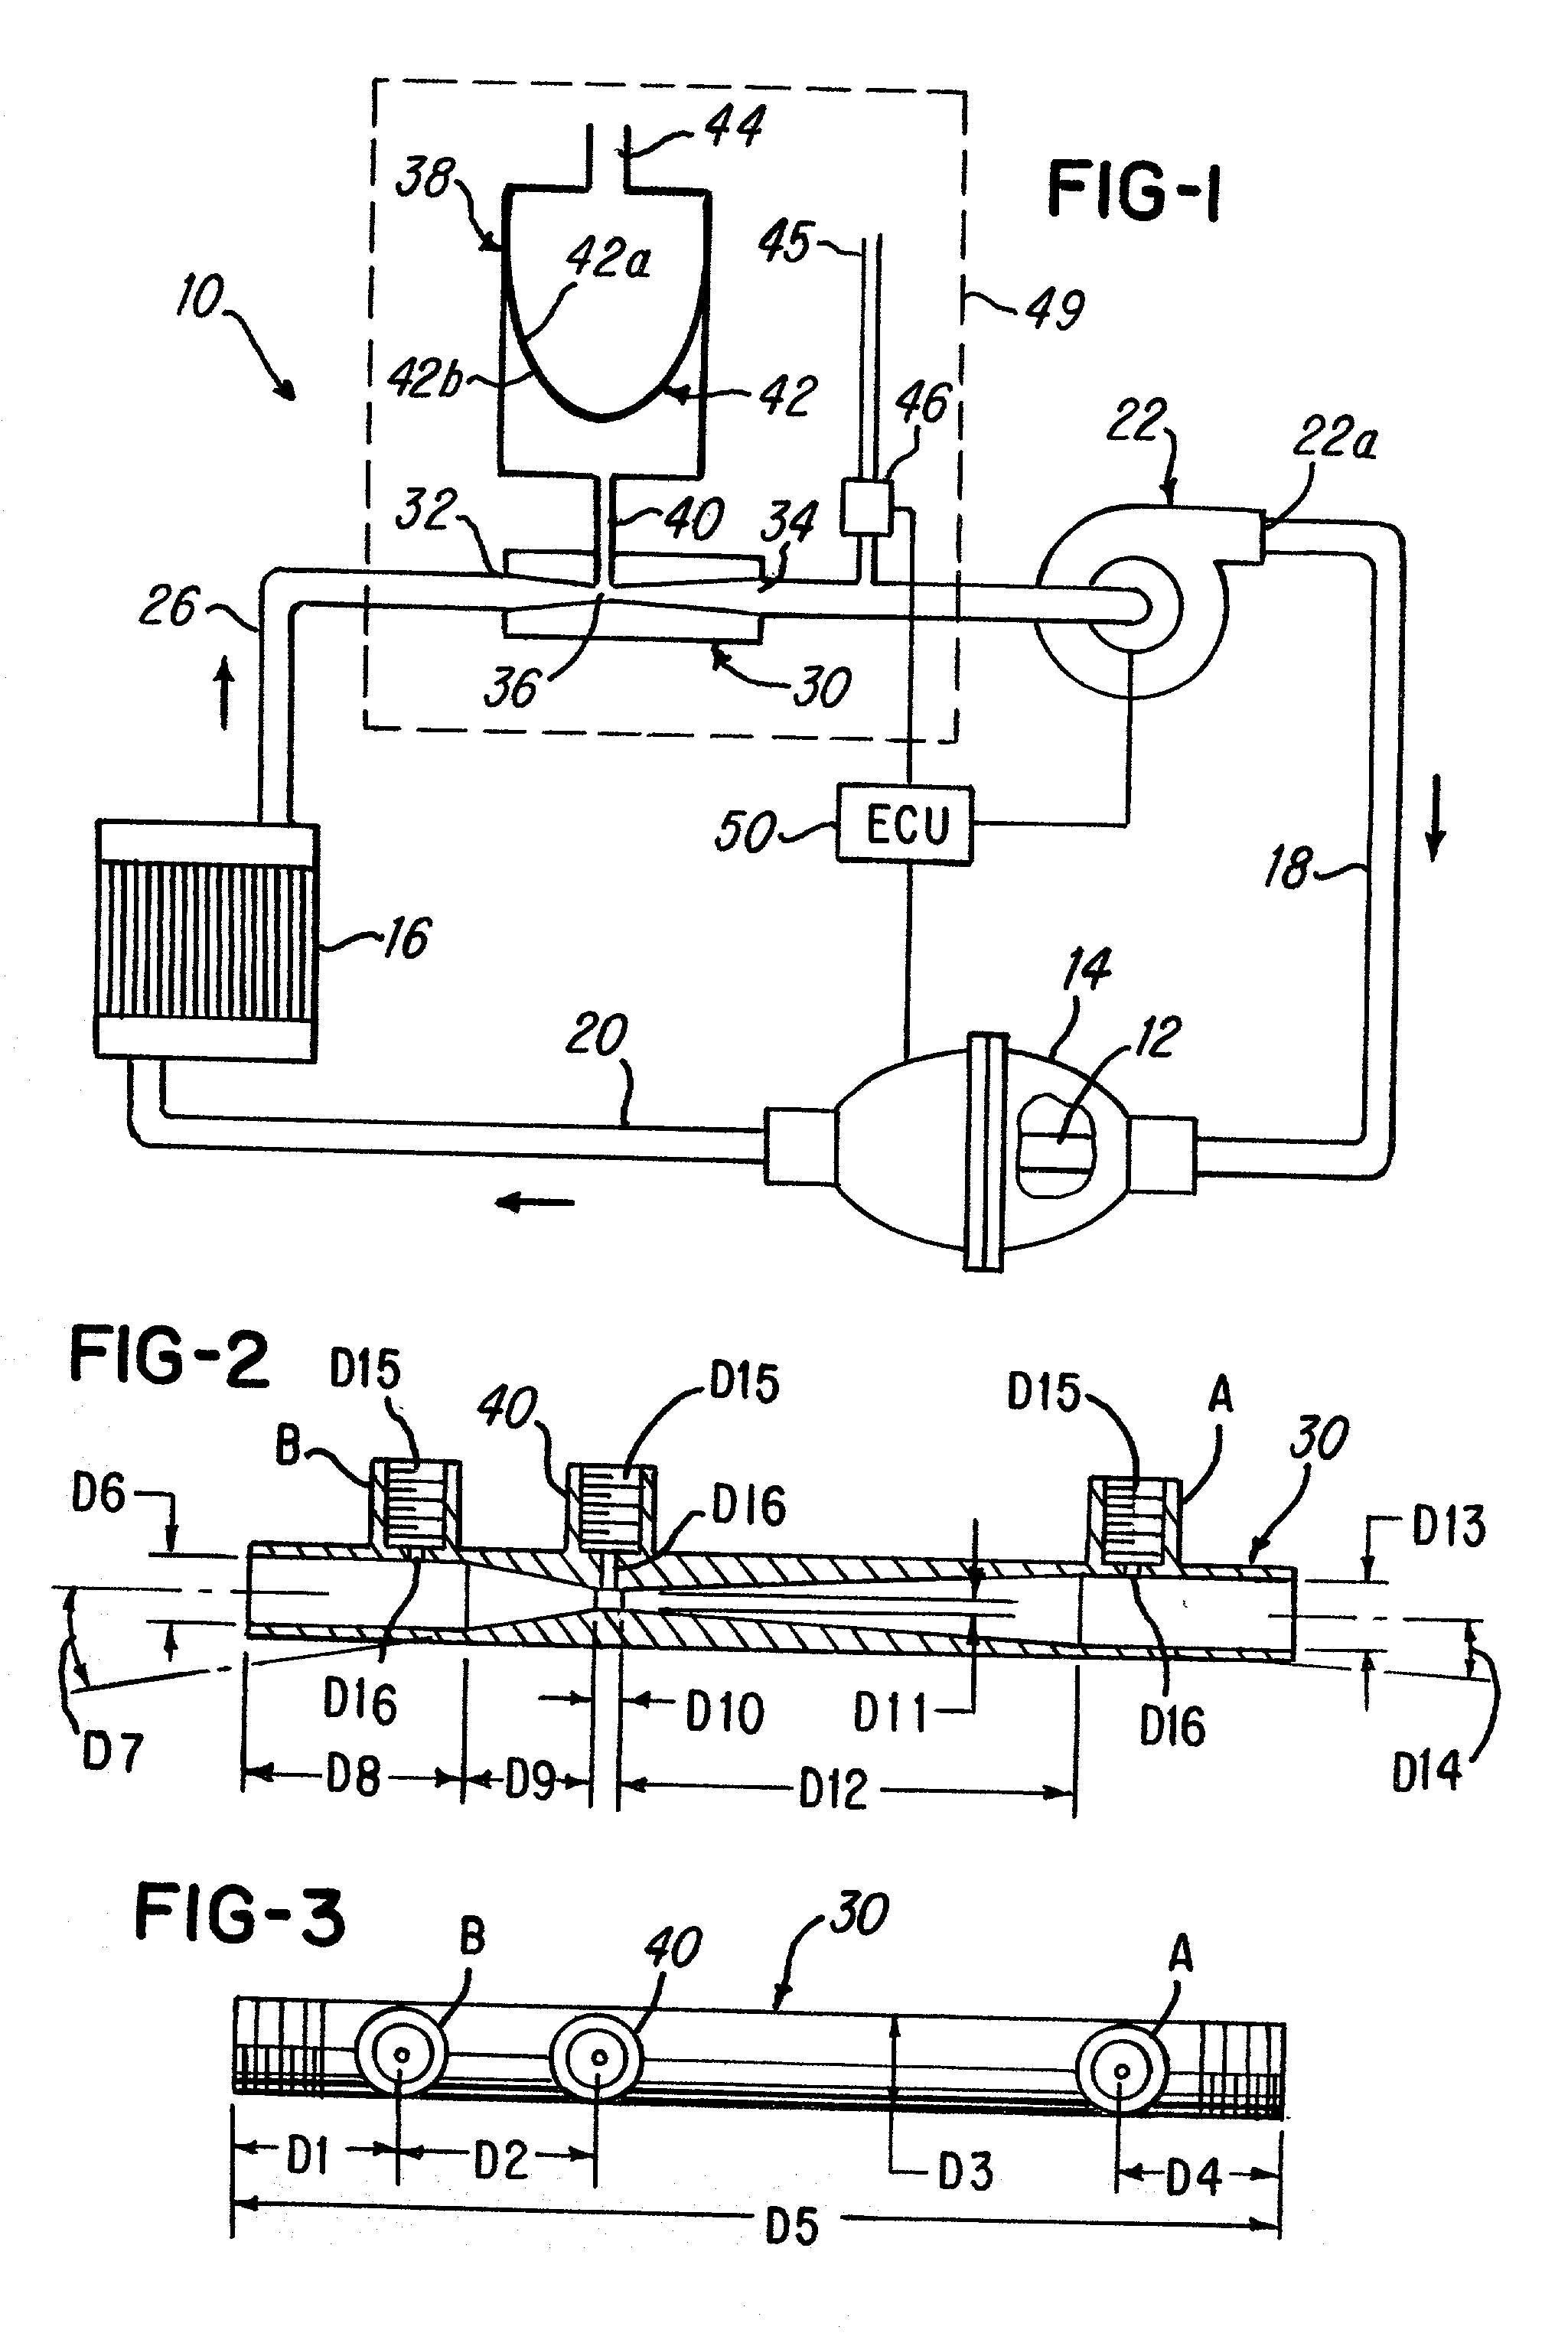 Method and system for cooling heat-generating component in a closed-loop system